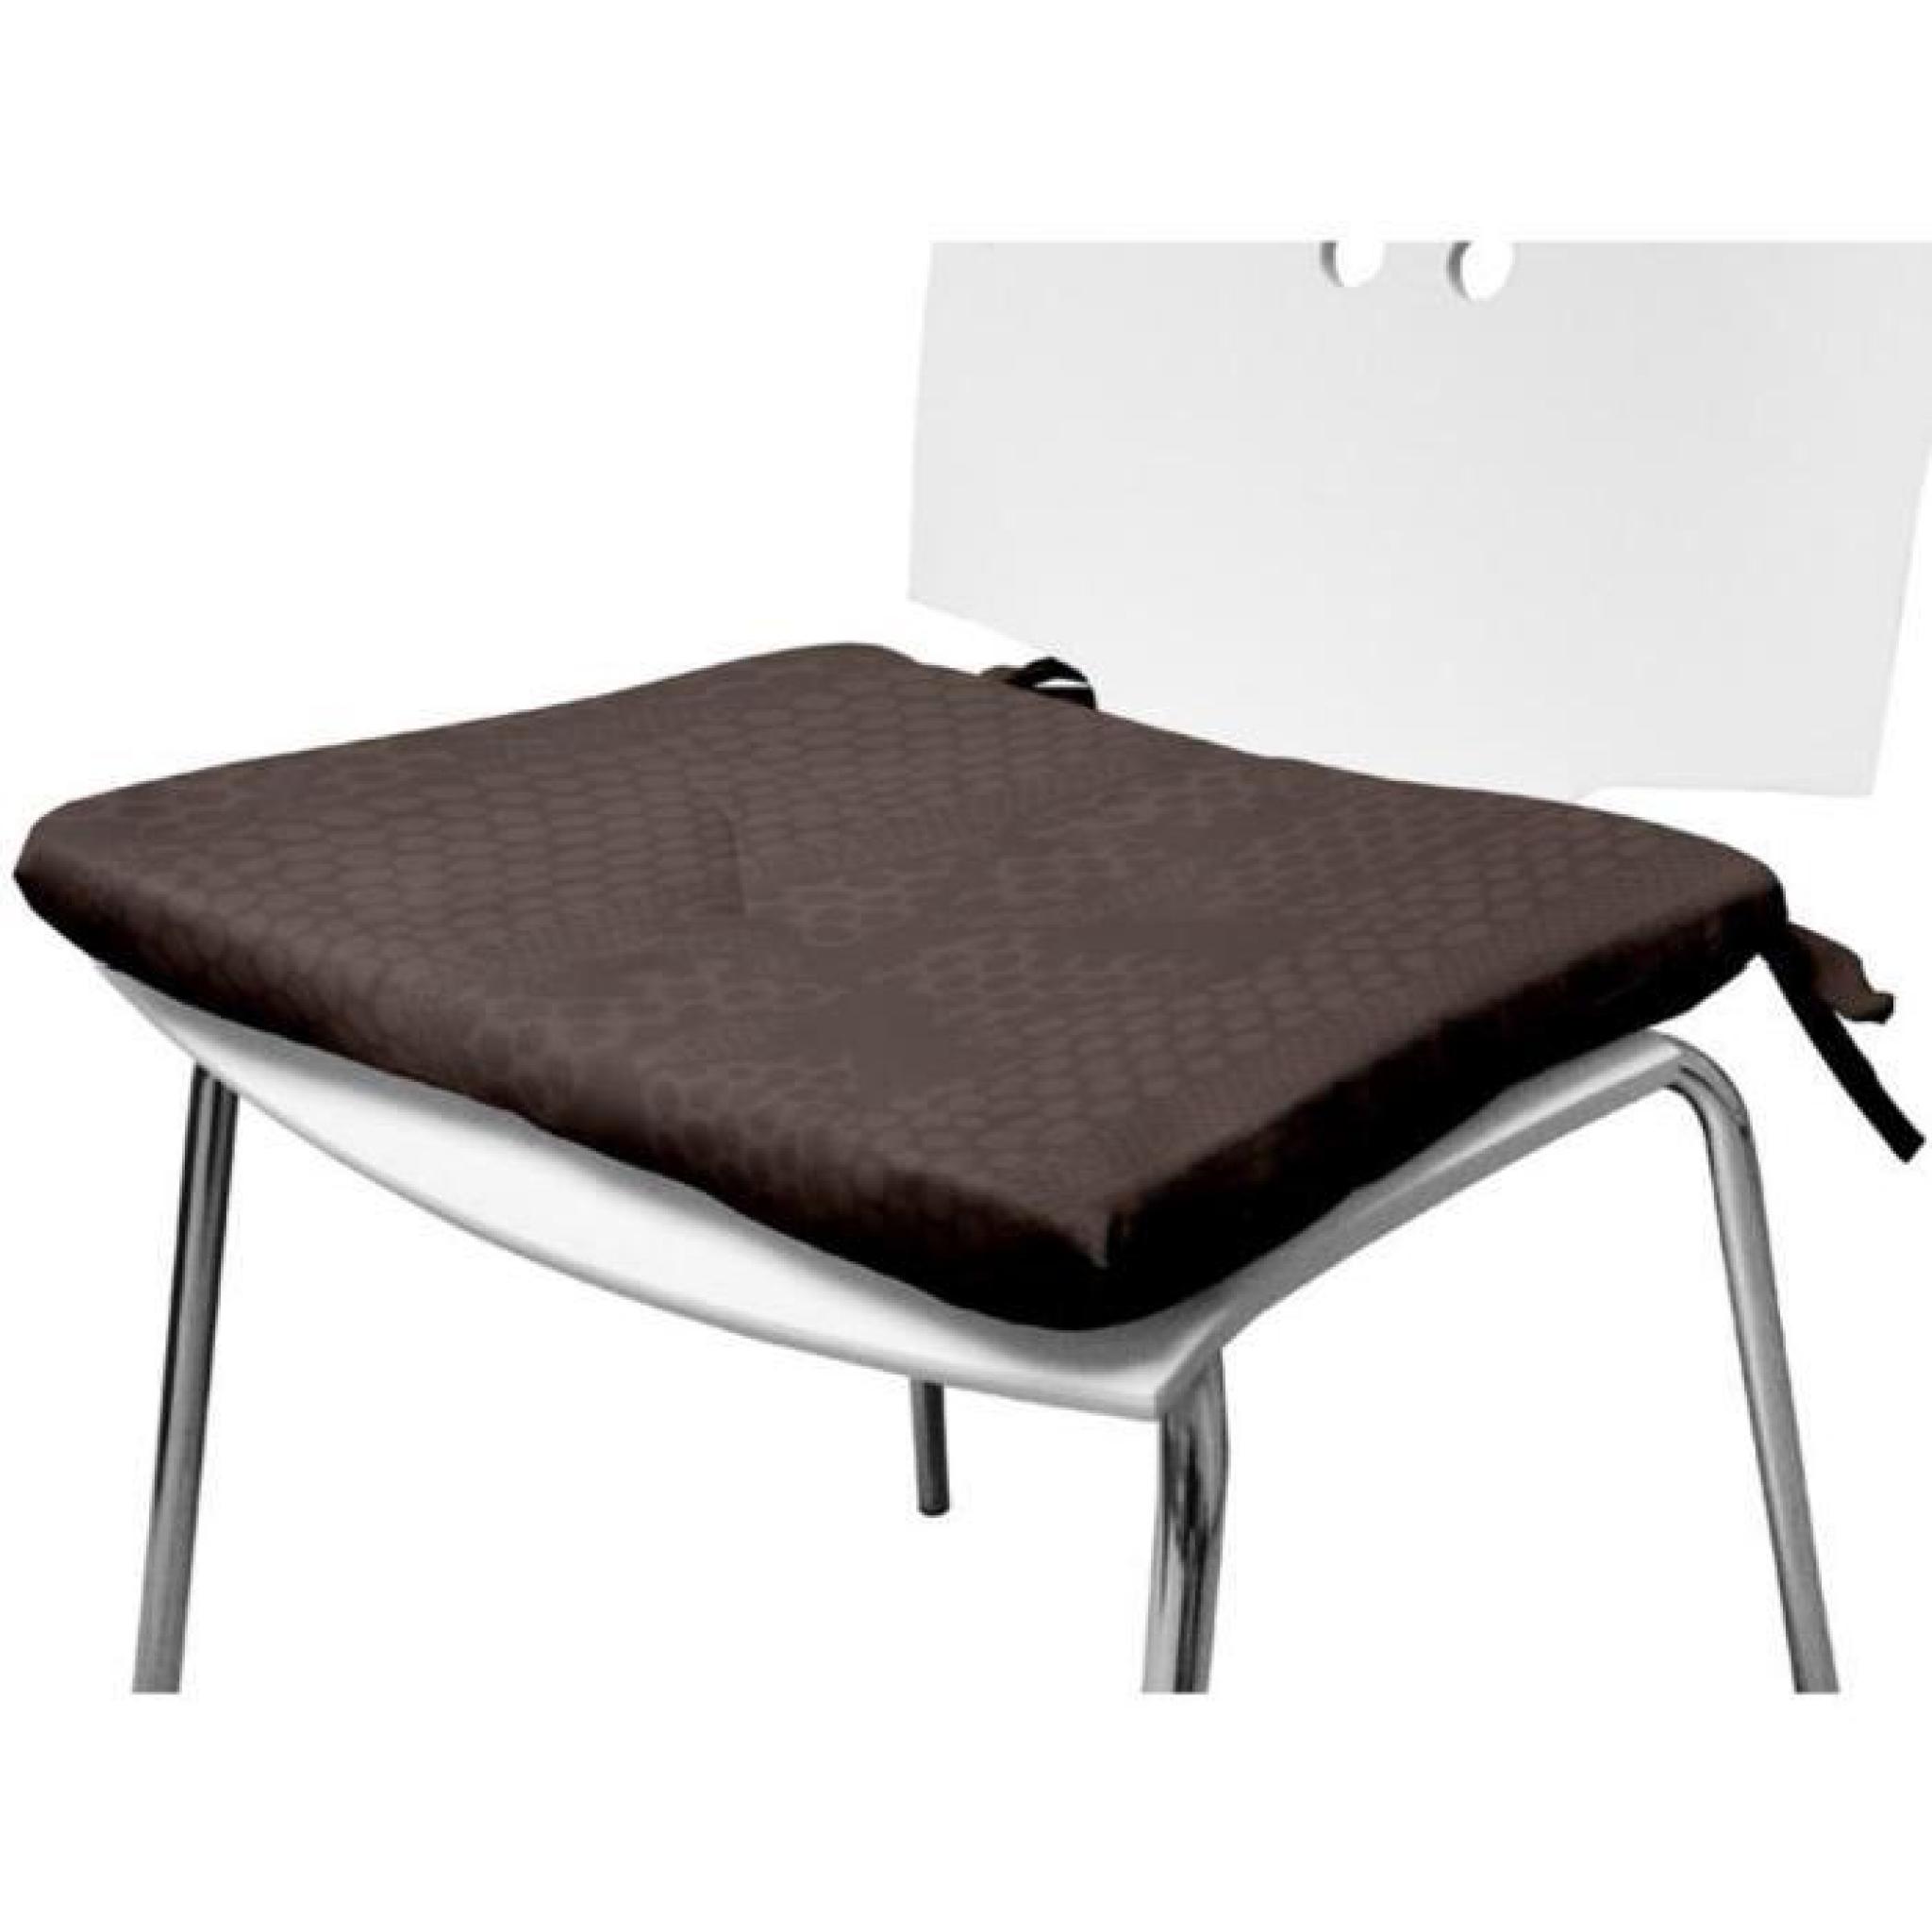 Galette de chaise 40x40 cm SNAKE taupe